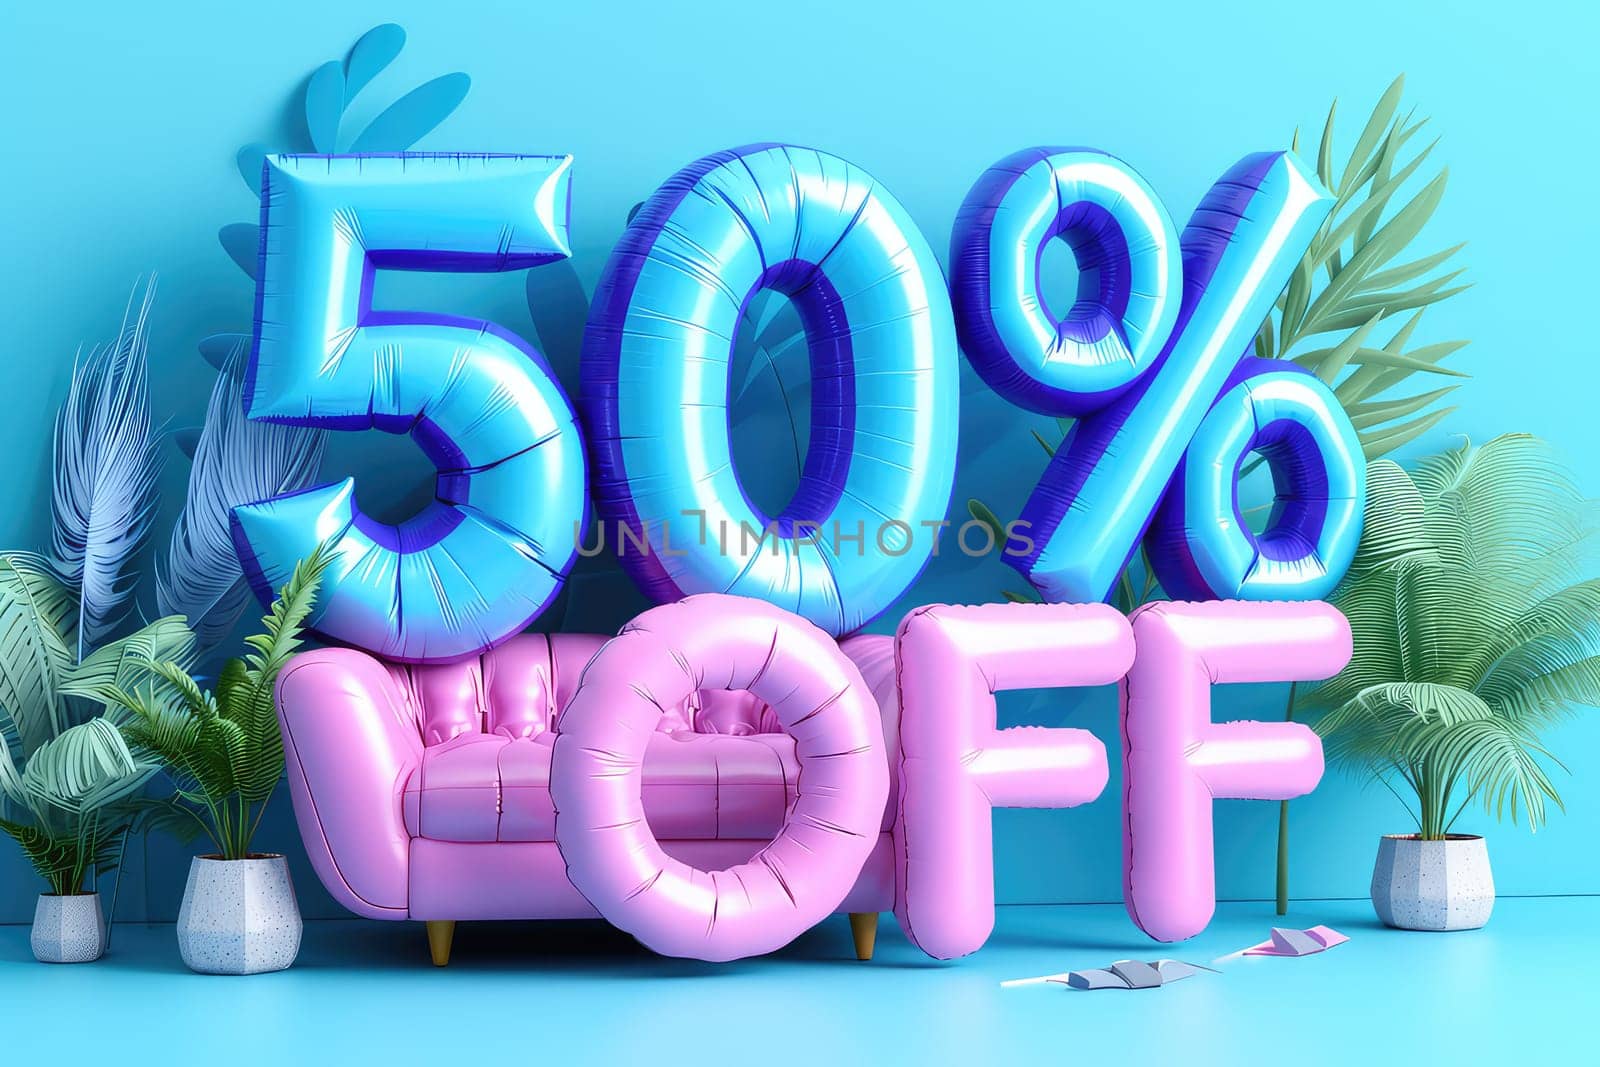 Tropical Sale Theme with Blue Balloon Letters Spelling Fifty Percent Off.